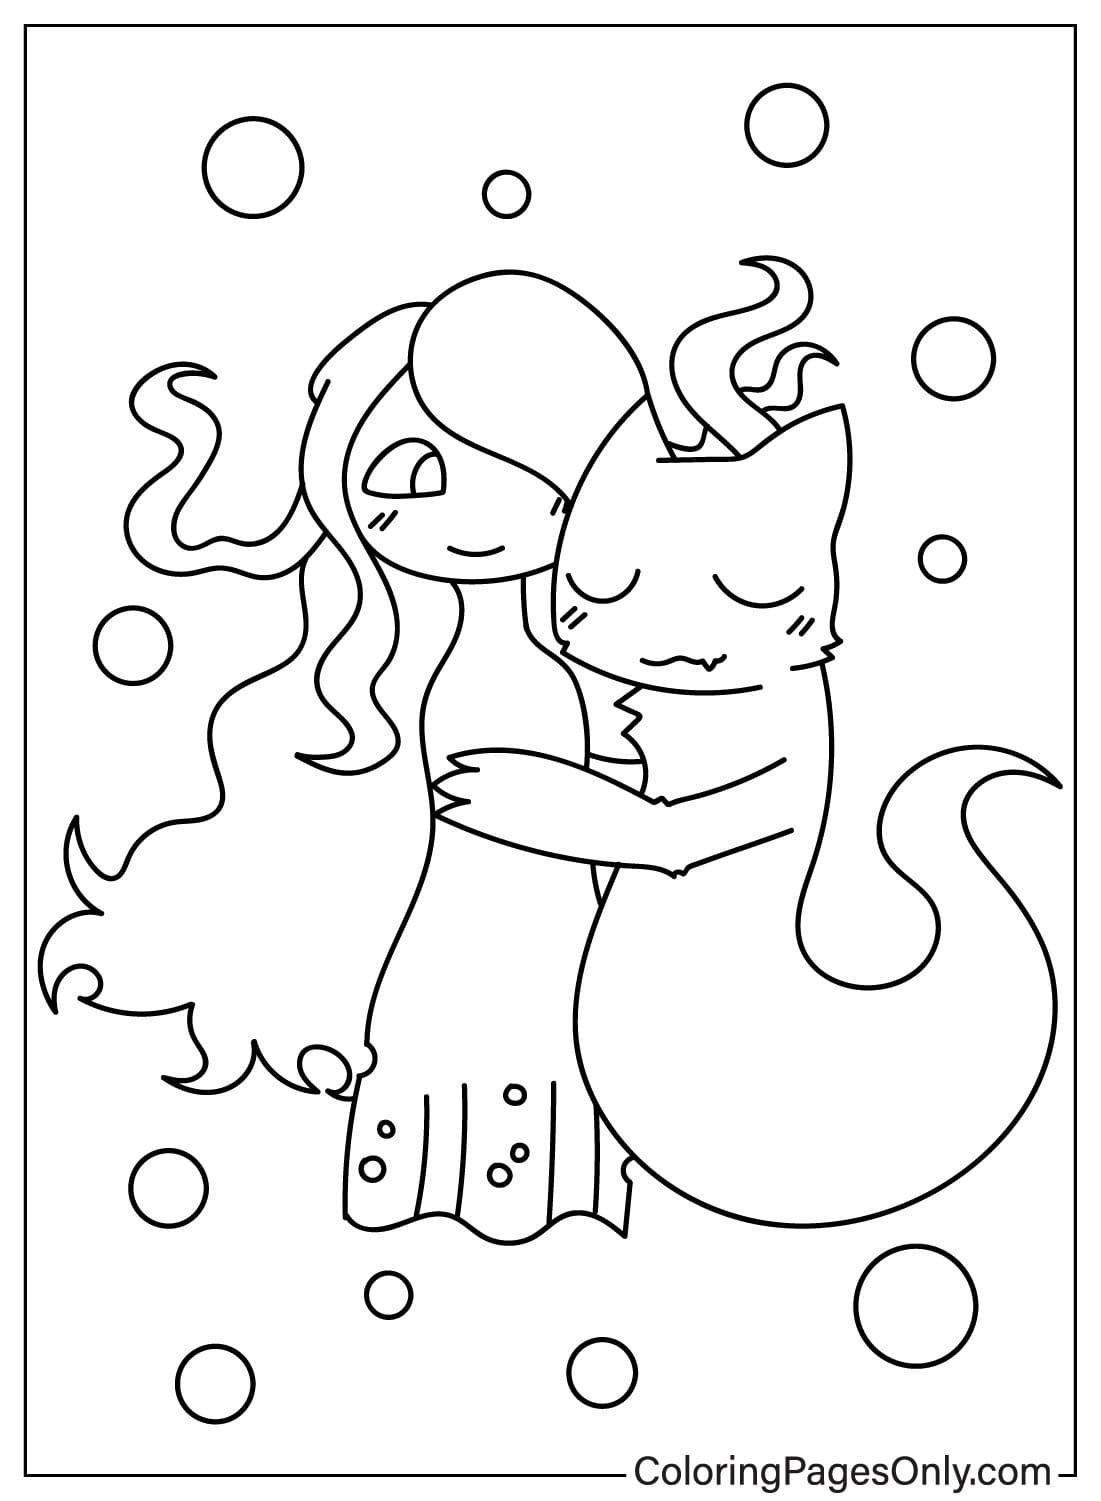 Ghazt and Whisp Coloring Page from Ghazt